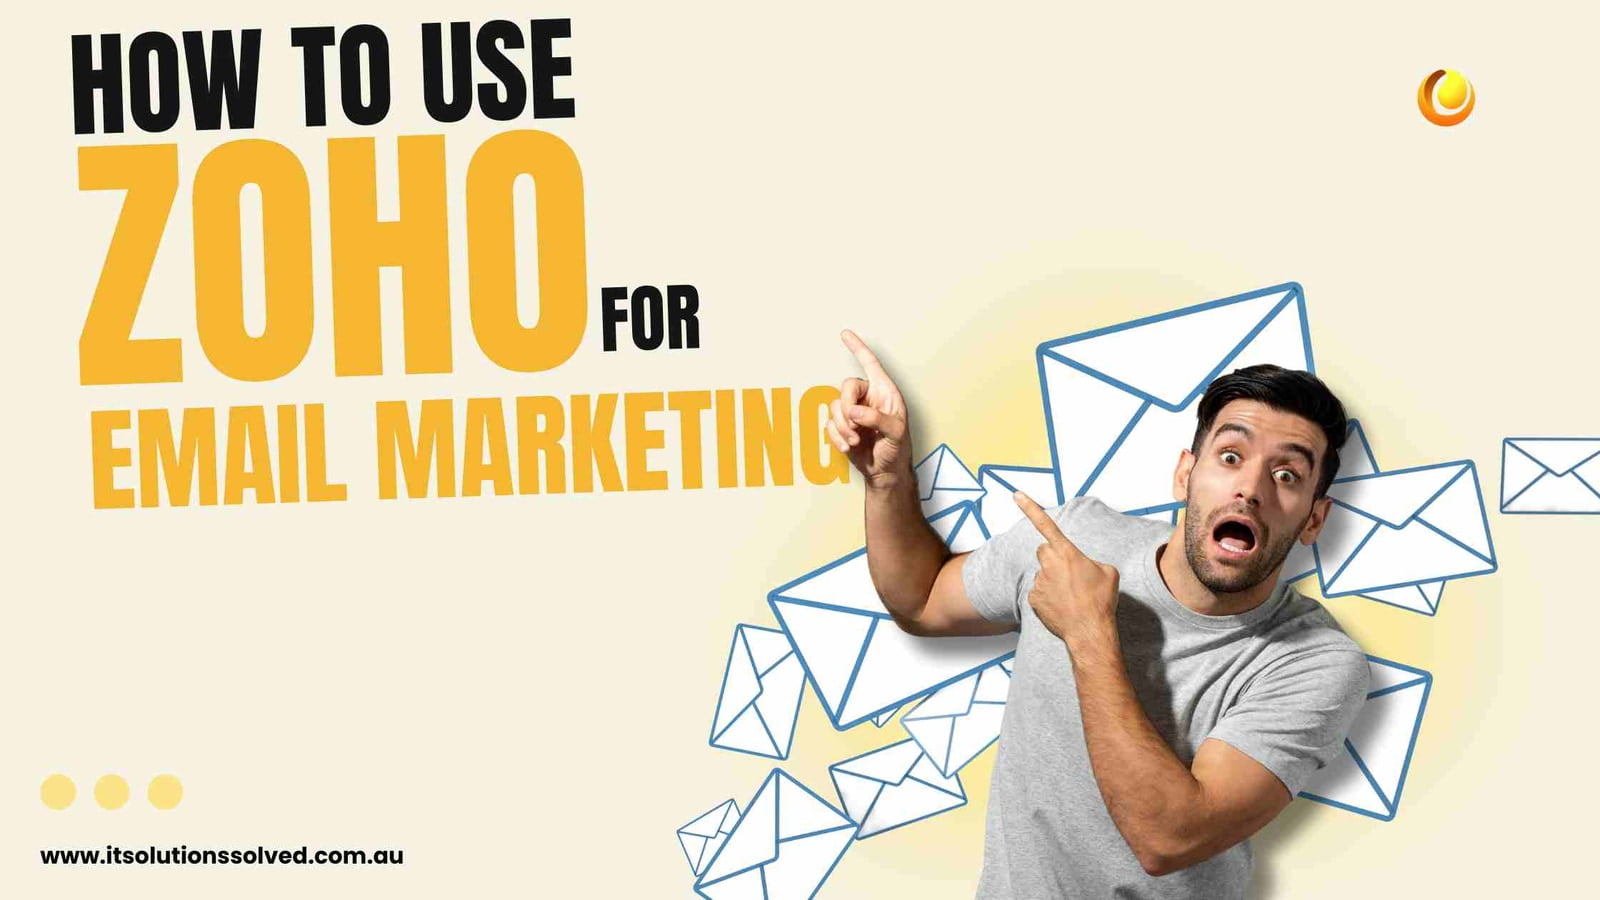 How To Use Zoho for Email Marketing Campaigns?